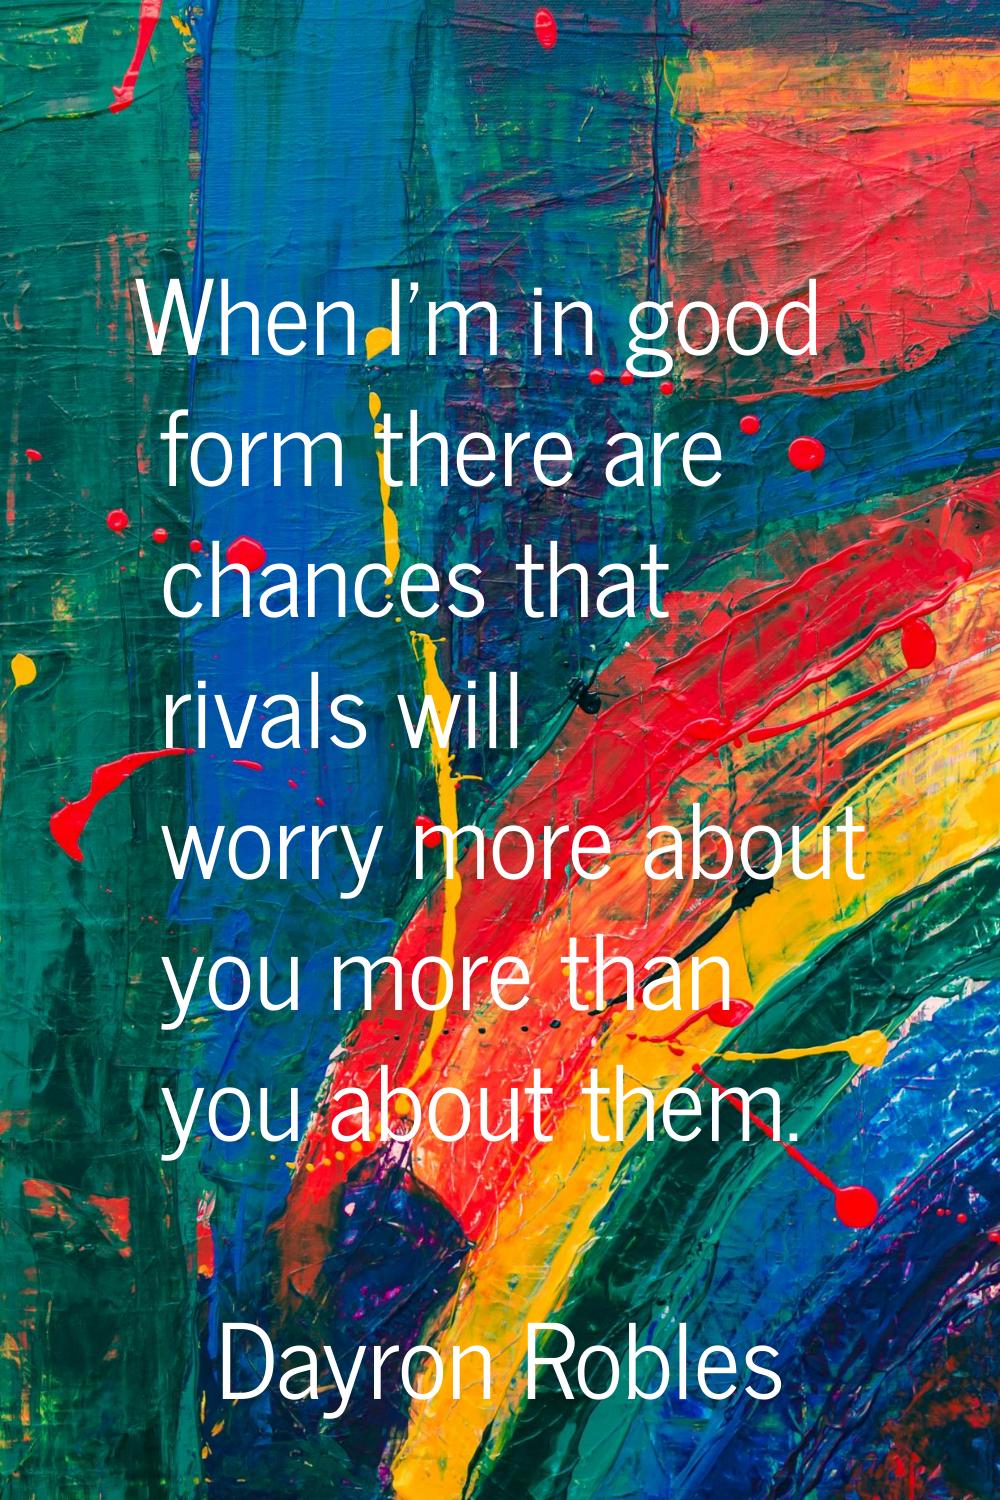 When I'm in good form there are chances that rivals will worry more about you more than you about t